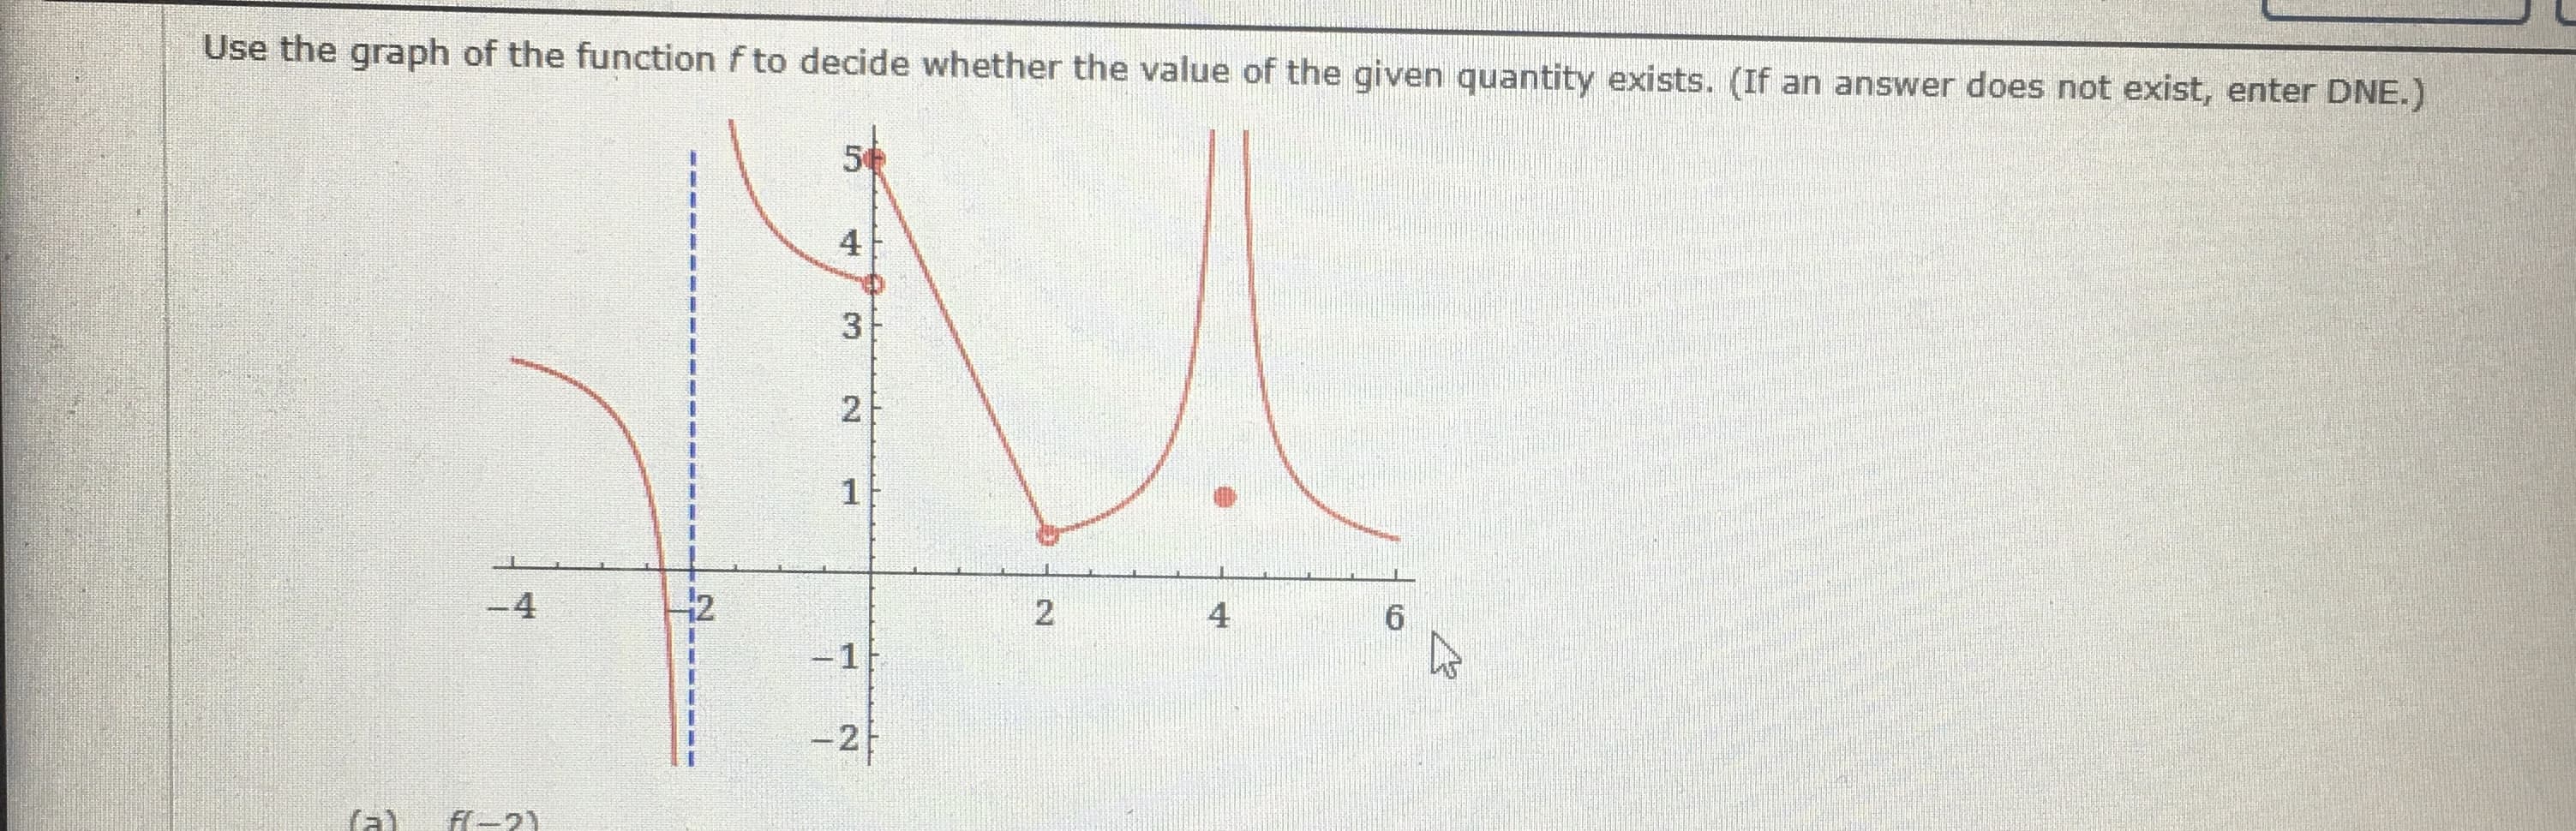 Use the graph of the function f to decide whether the value of the given quantity exists. (If an answer does not exist, enter DNE.)
4
3
1
-4
42
2
4
-1}
2,
2.
